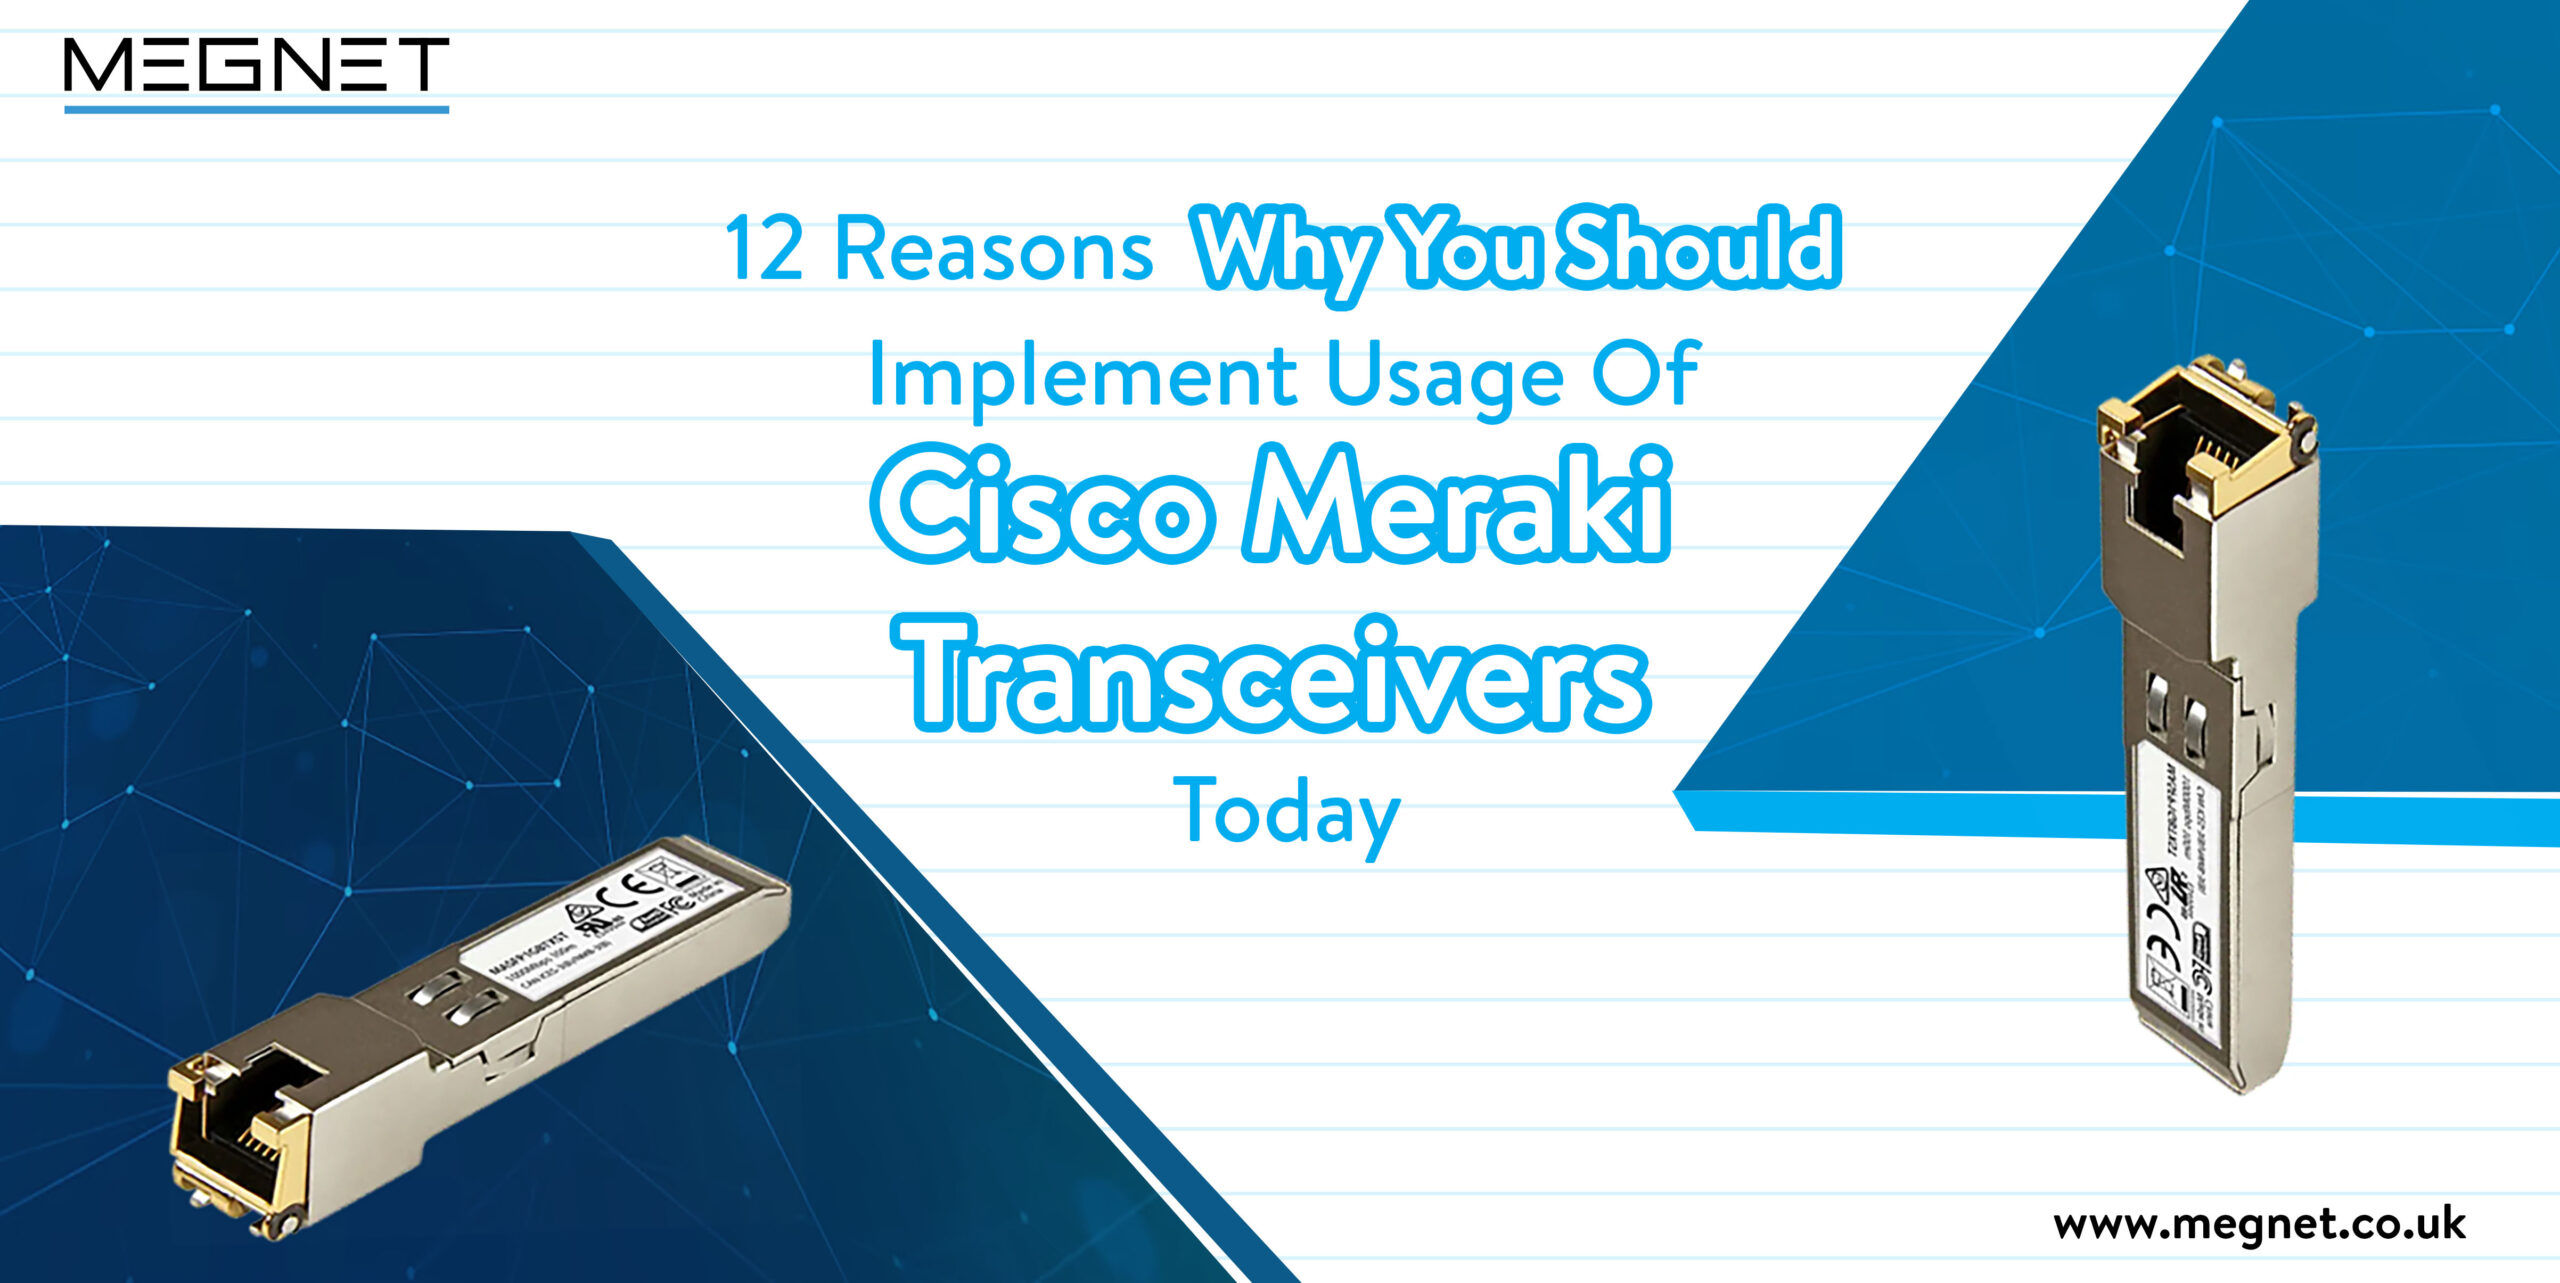 Cisco Meraki Transceivers | 12 Reasons Why You Should Not Choose Anything Else 